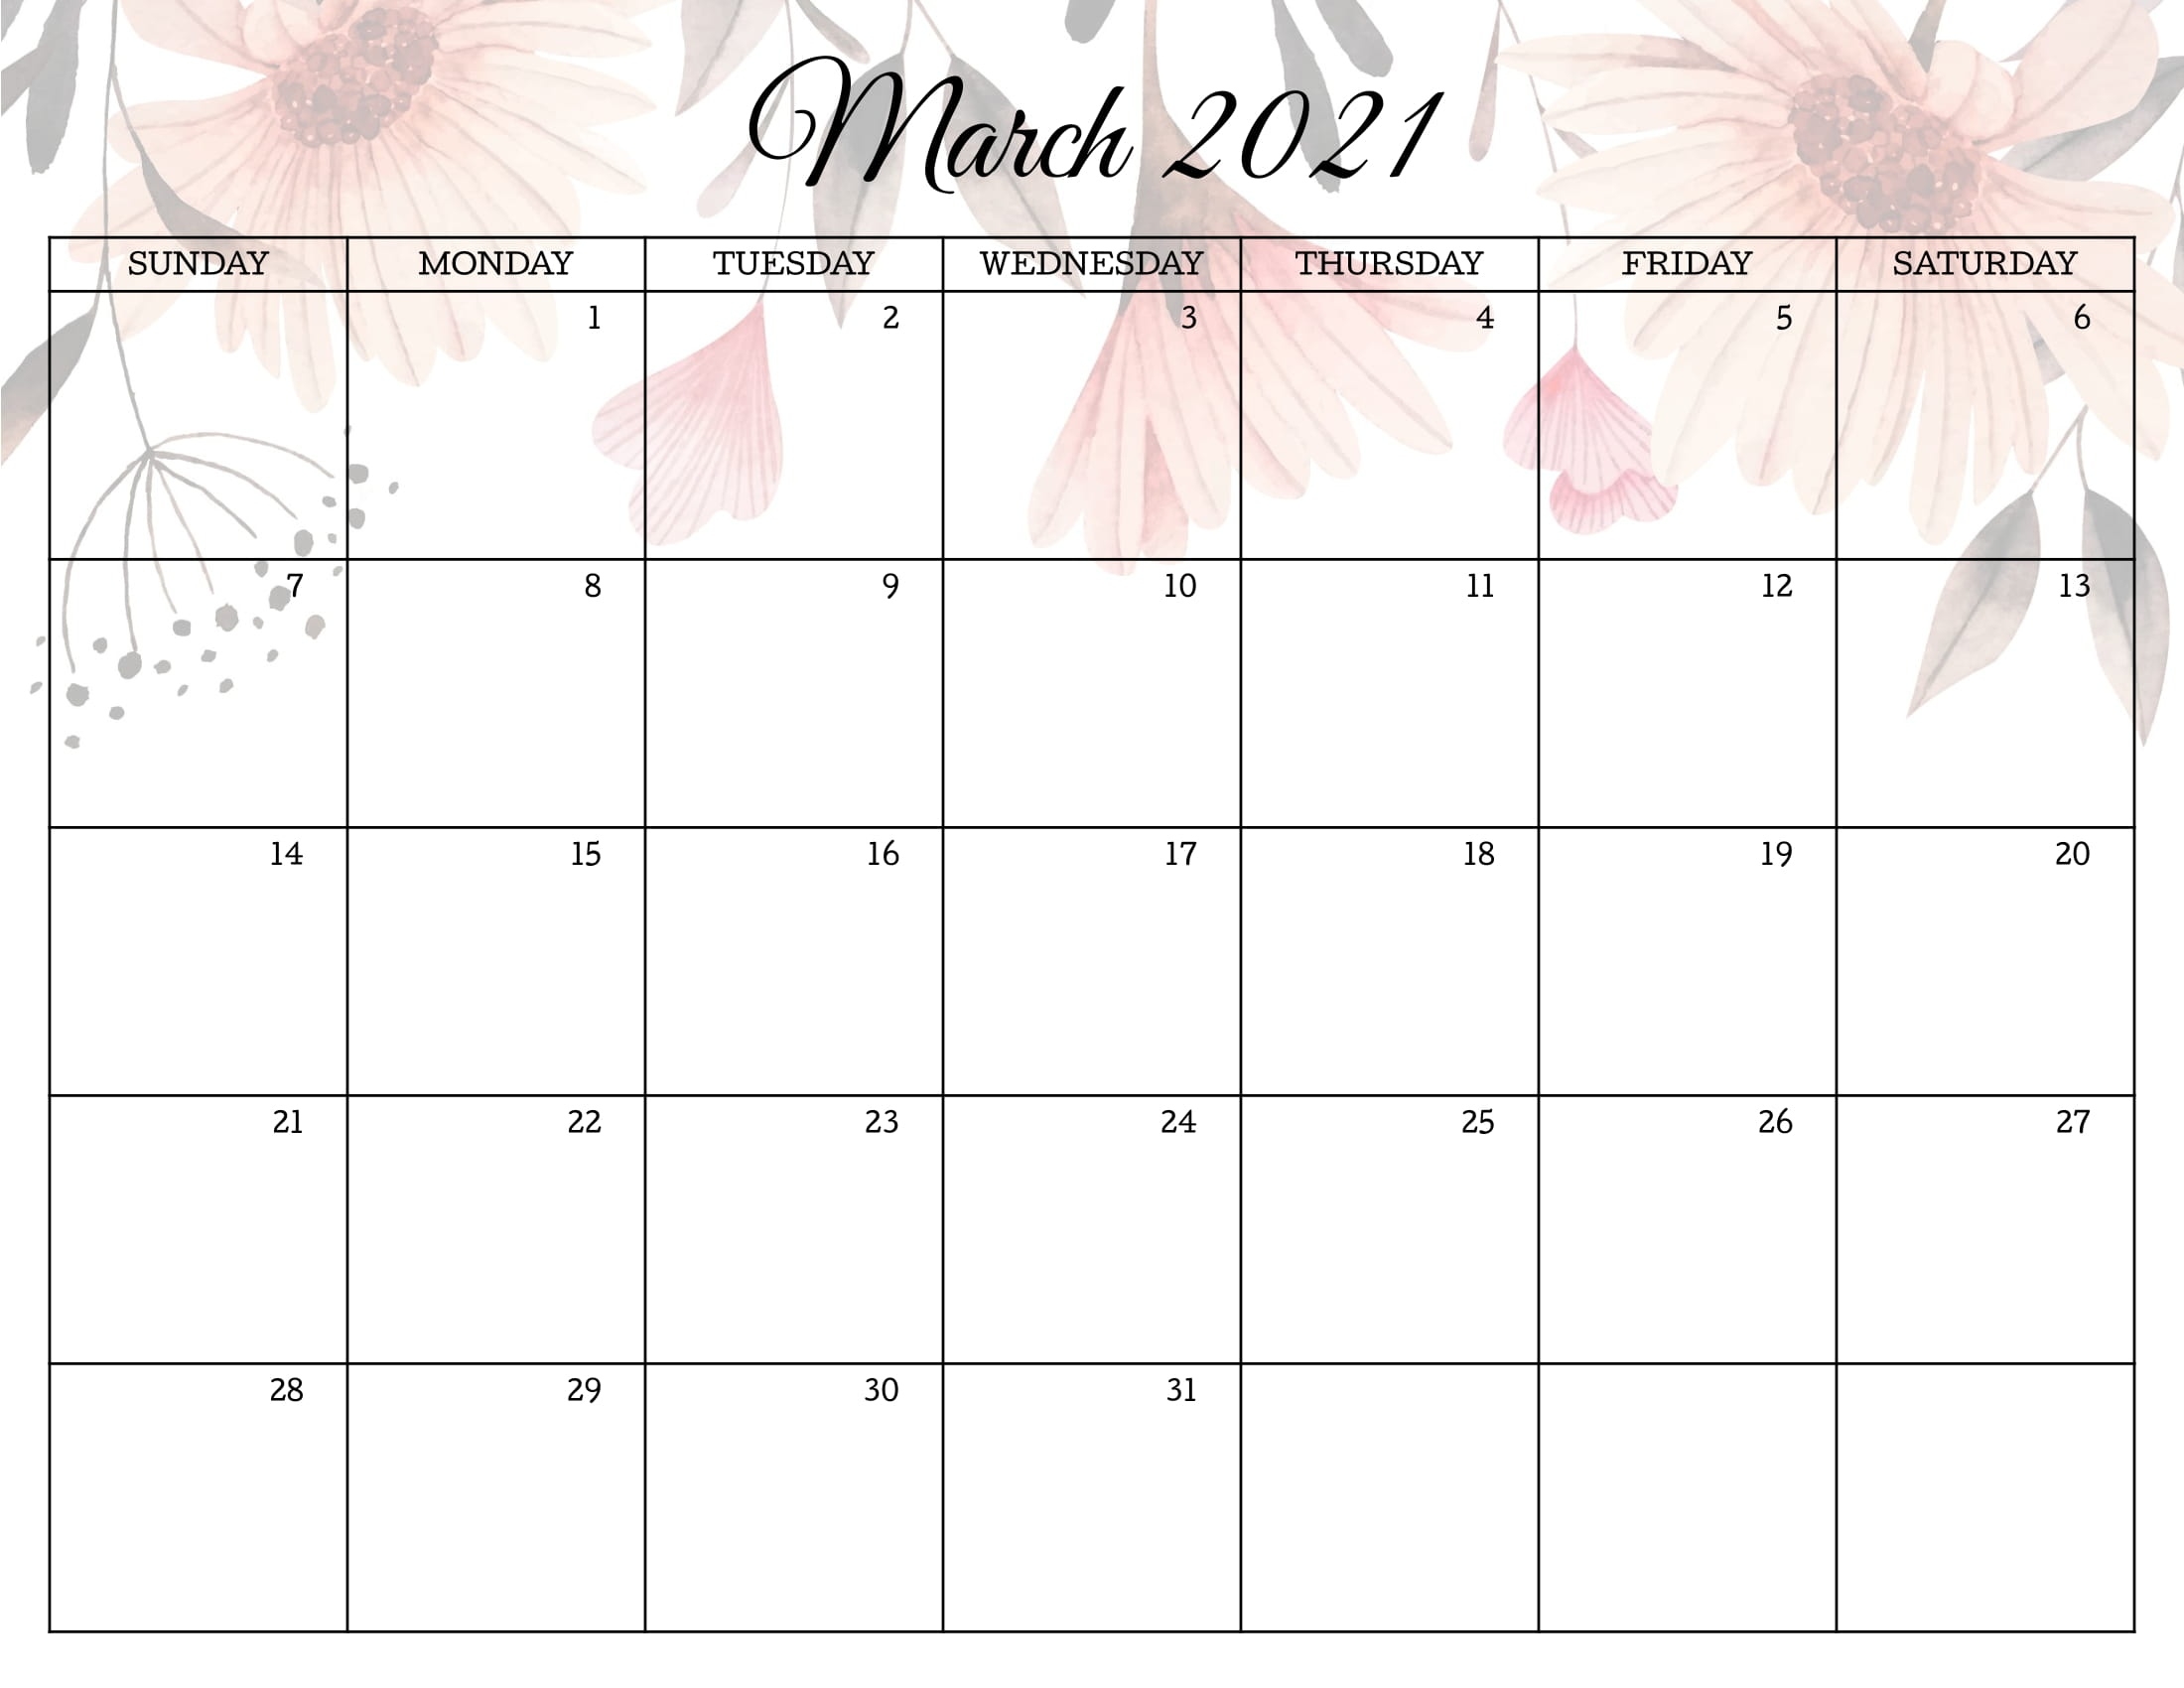 Floral March 2021 Calendar Templates - Printable 2020 Calendars Floral March 2021 Calendar Templates Calendar From October 2020 To March 2021